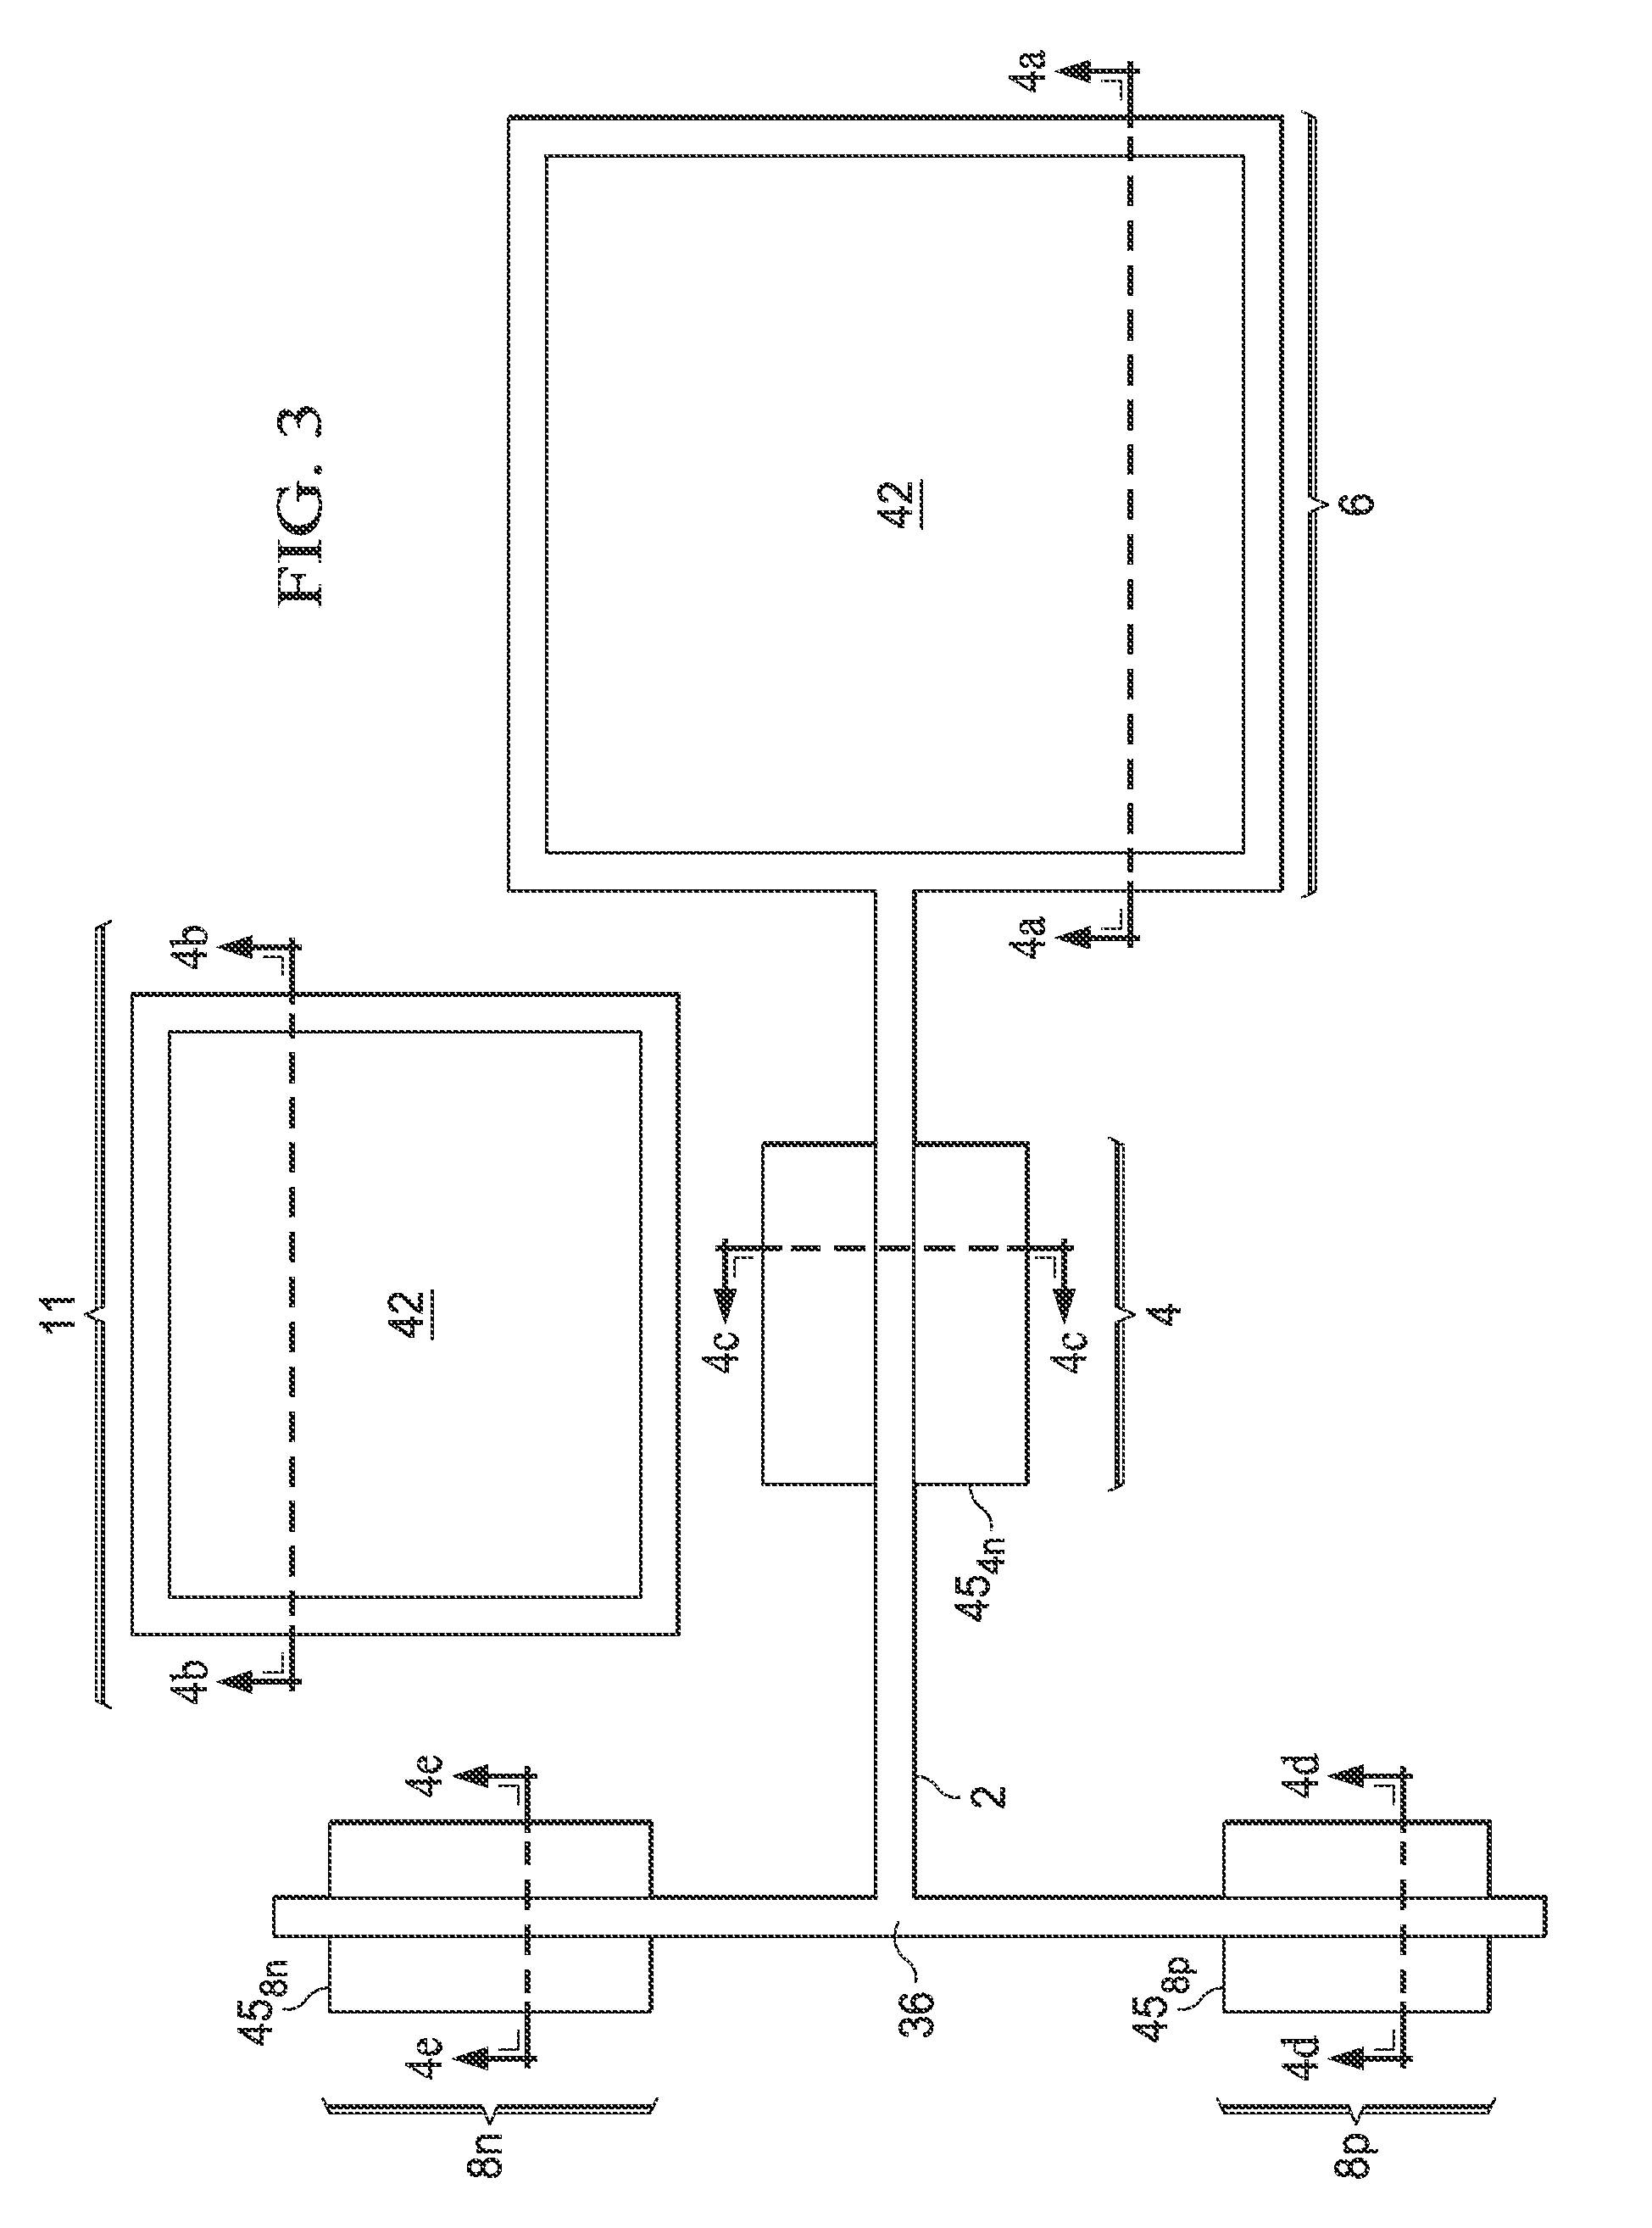 Low leakage capacitor for analog floating-gate integrated circuits